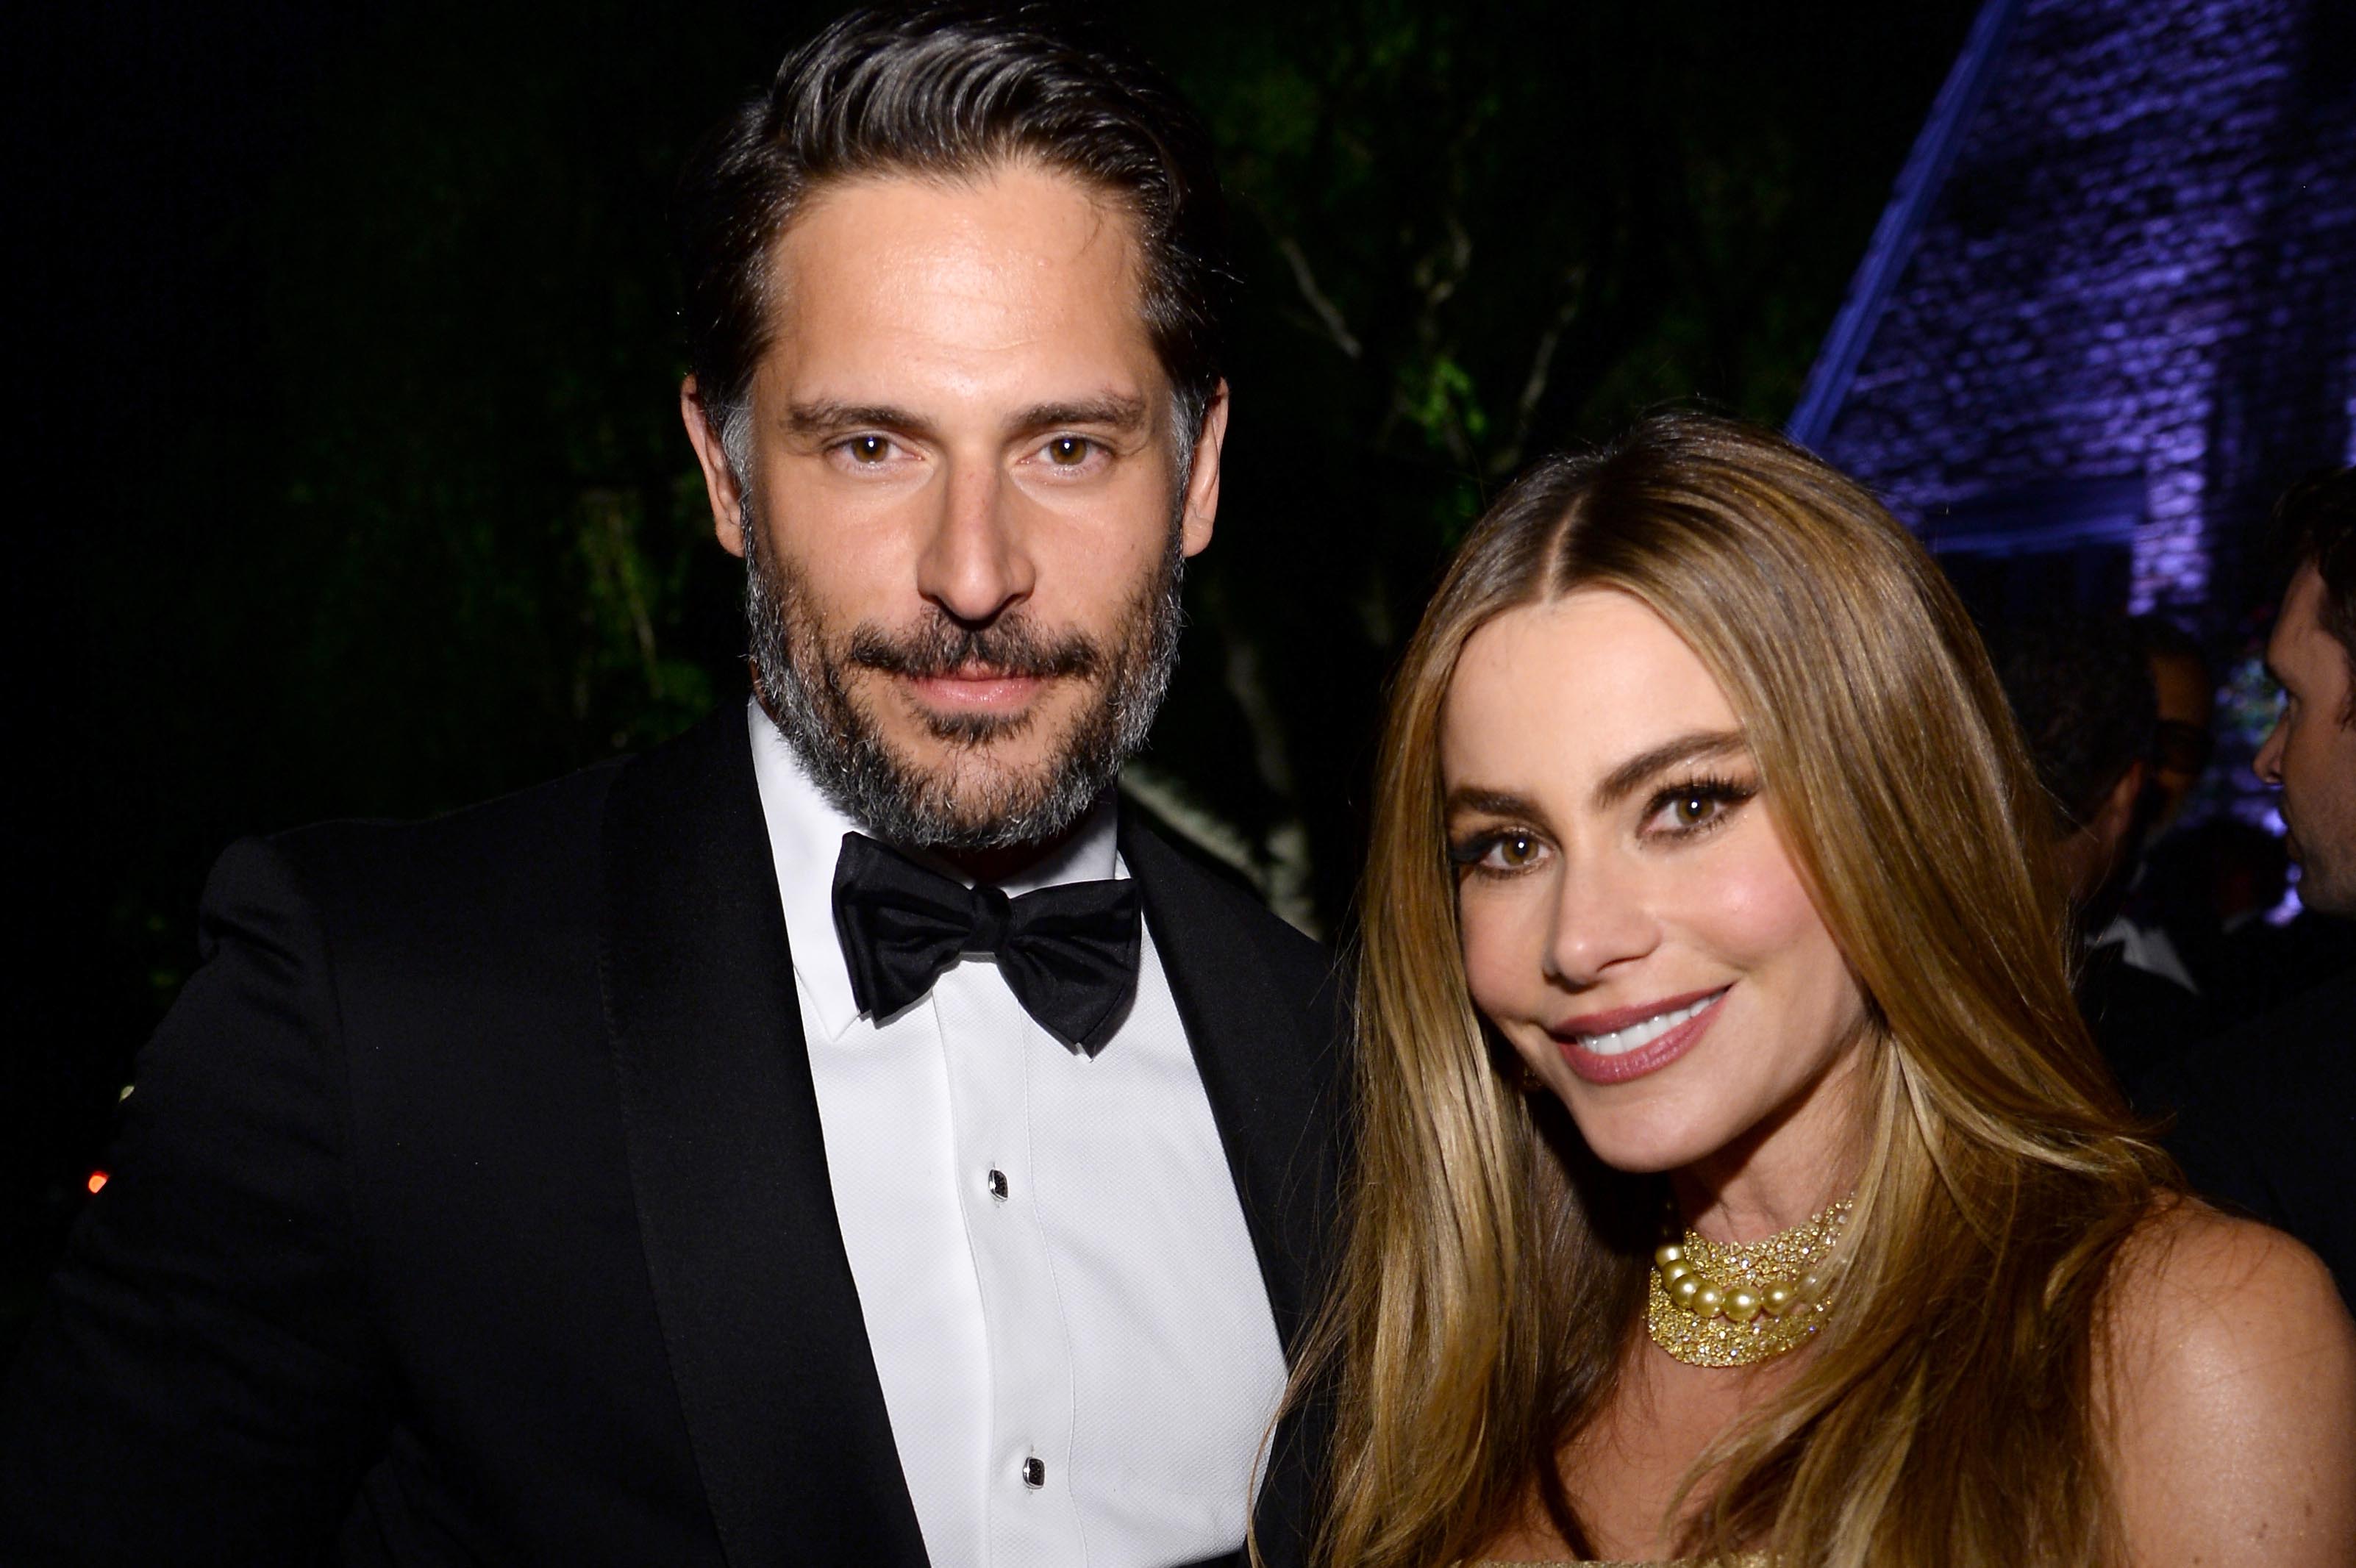 WASHINGTON, DC - MAY 03:  Actors Joe Manganiello (L) and Sofia Vergara attend the Bloomberg & Vanity Fair cocktail reception following the 2014 WHCA Dinner at Villa Firenze on May 3, 2014 in Washington, DC.  (Photo by Dimitrios Kambouris/VF14/WireImage)